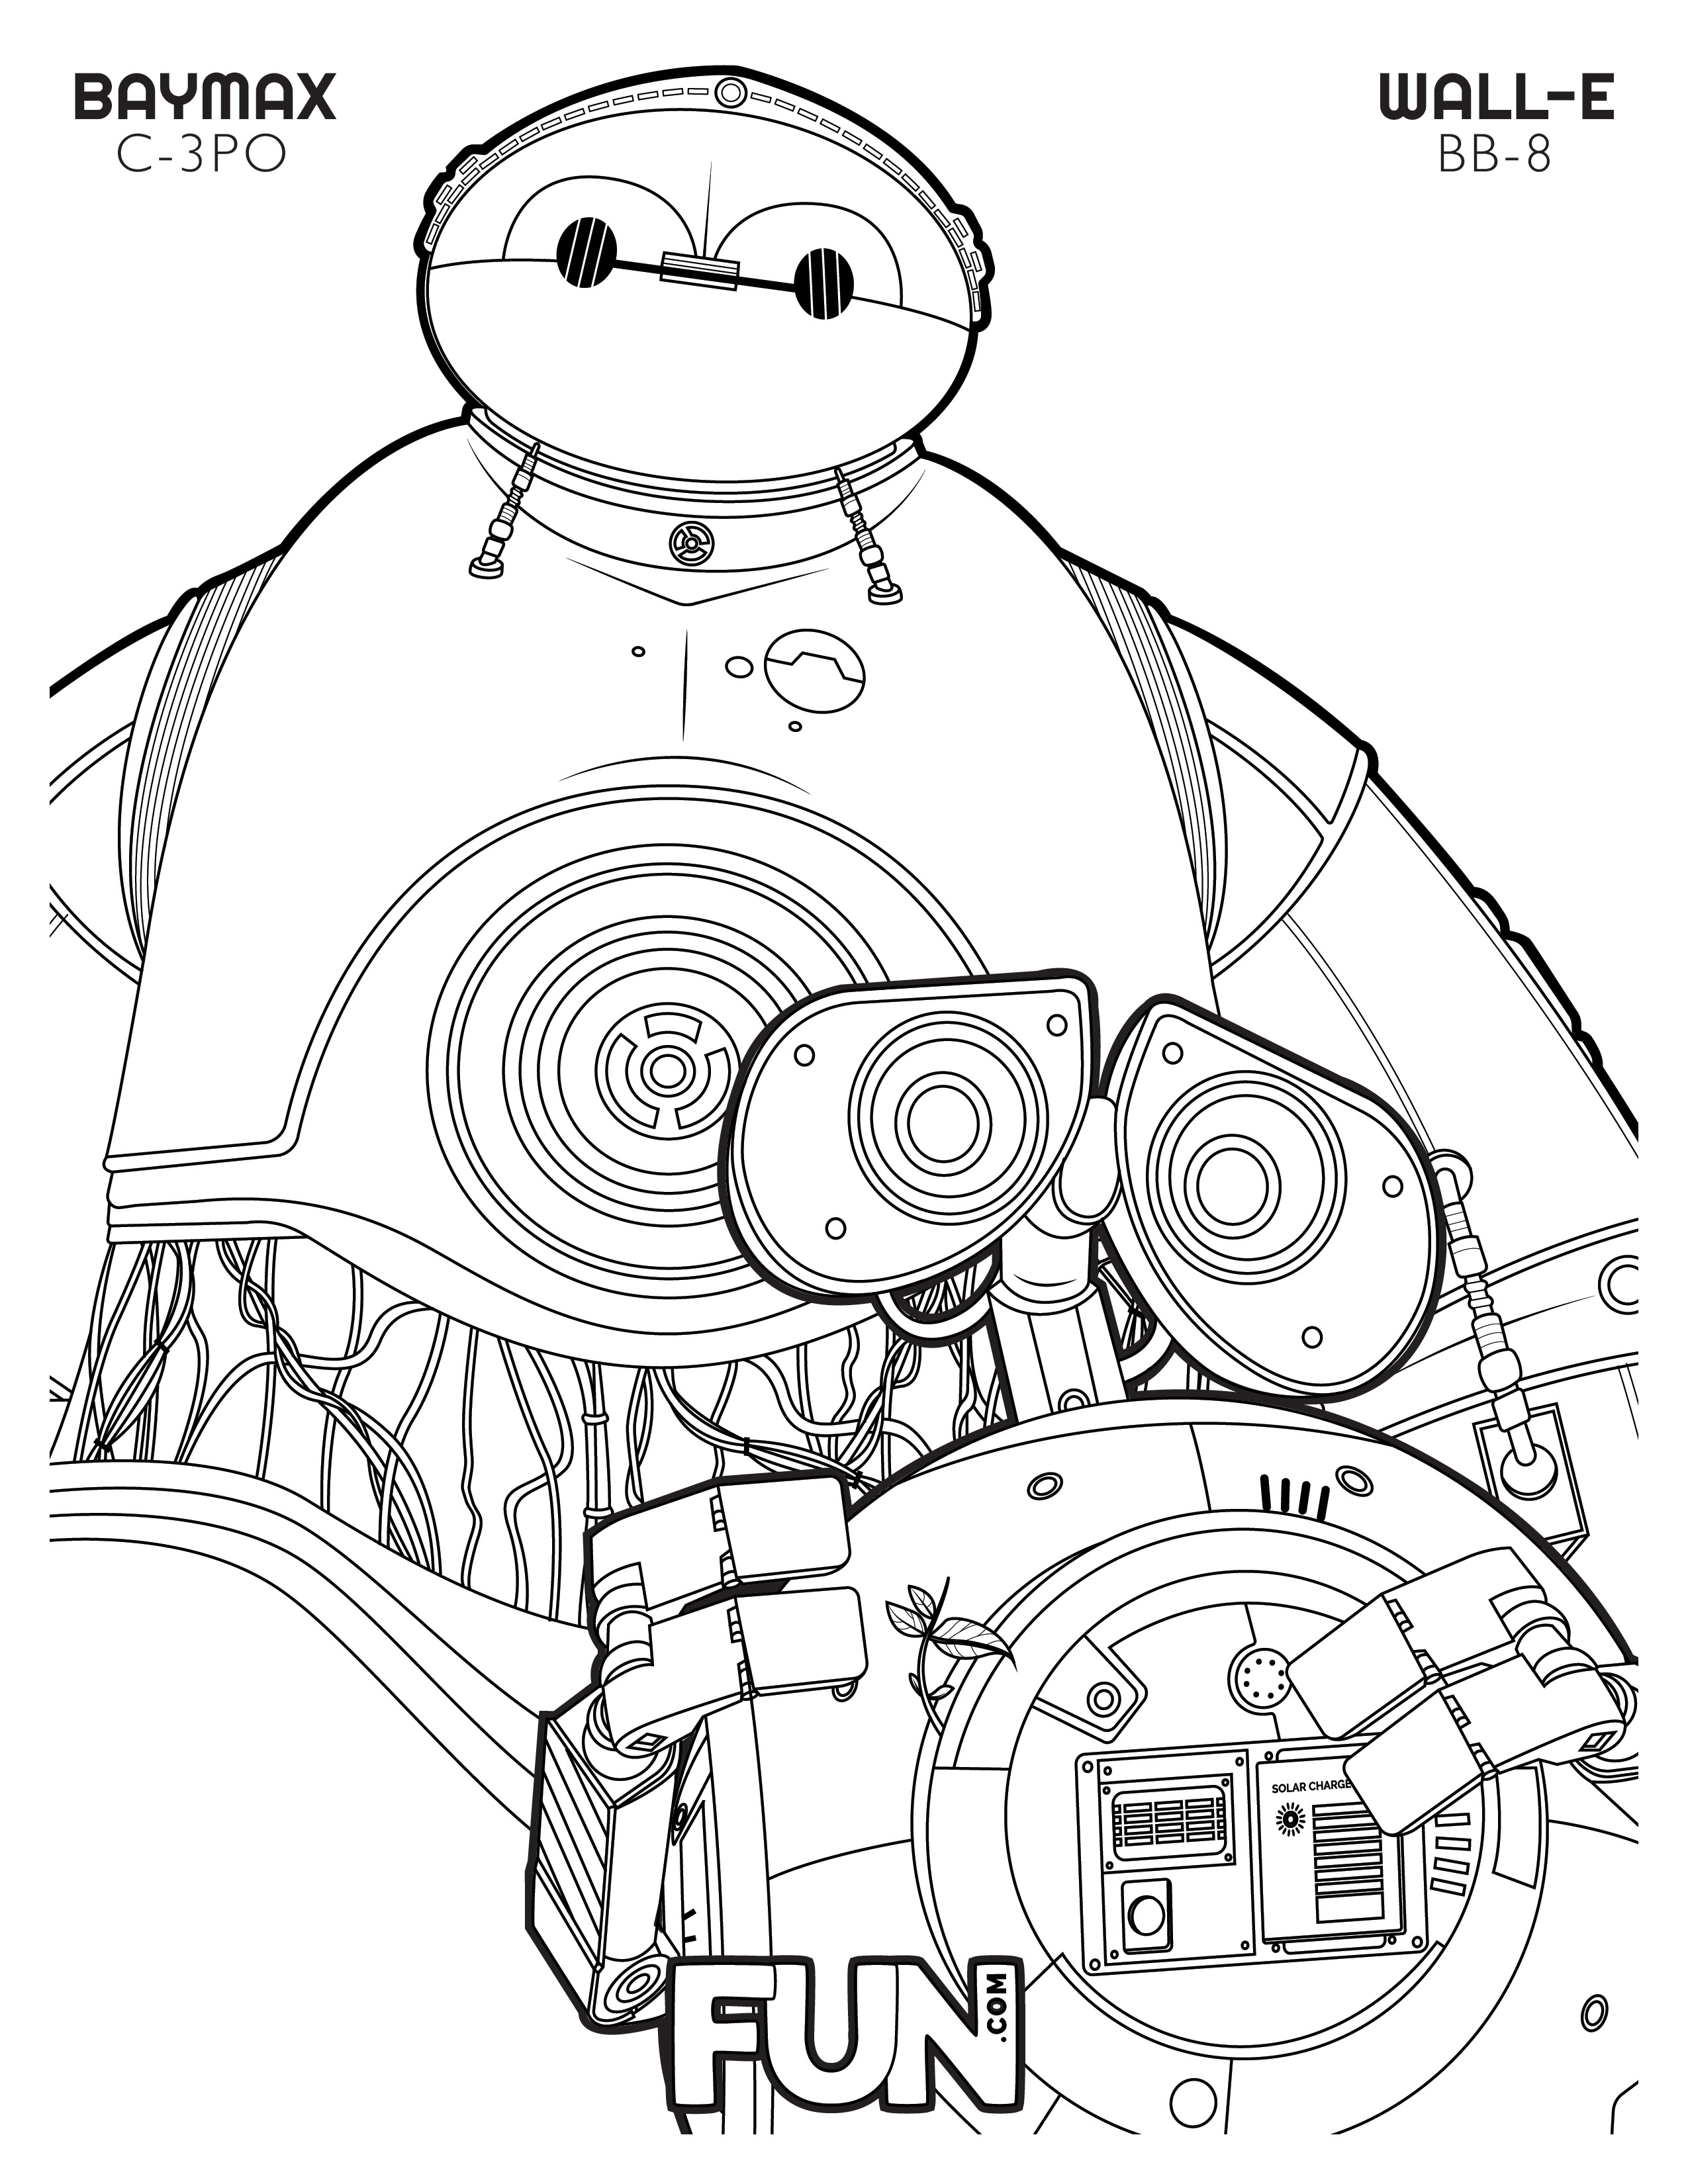 Wall-E BB-8 and Baymax C-3PO Coloring Page